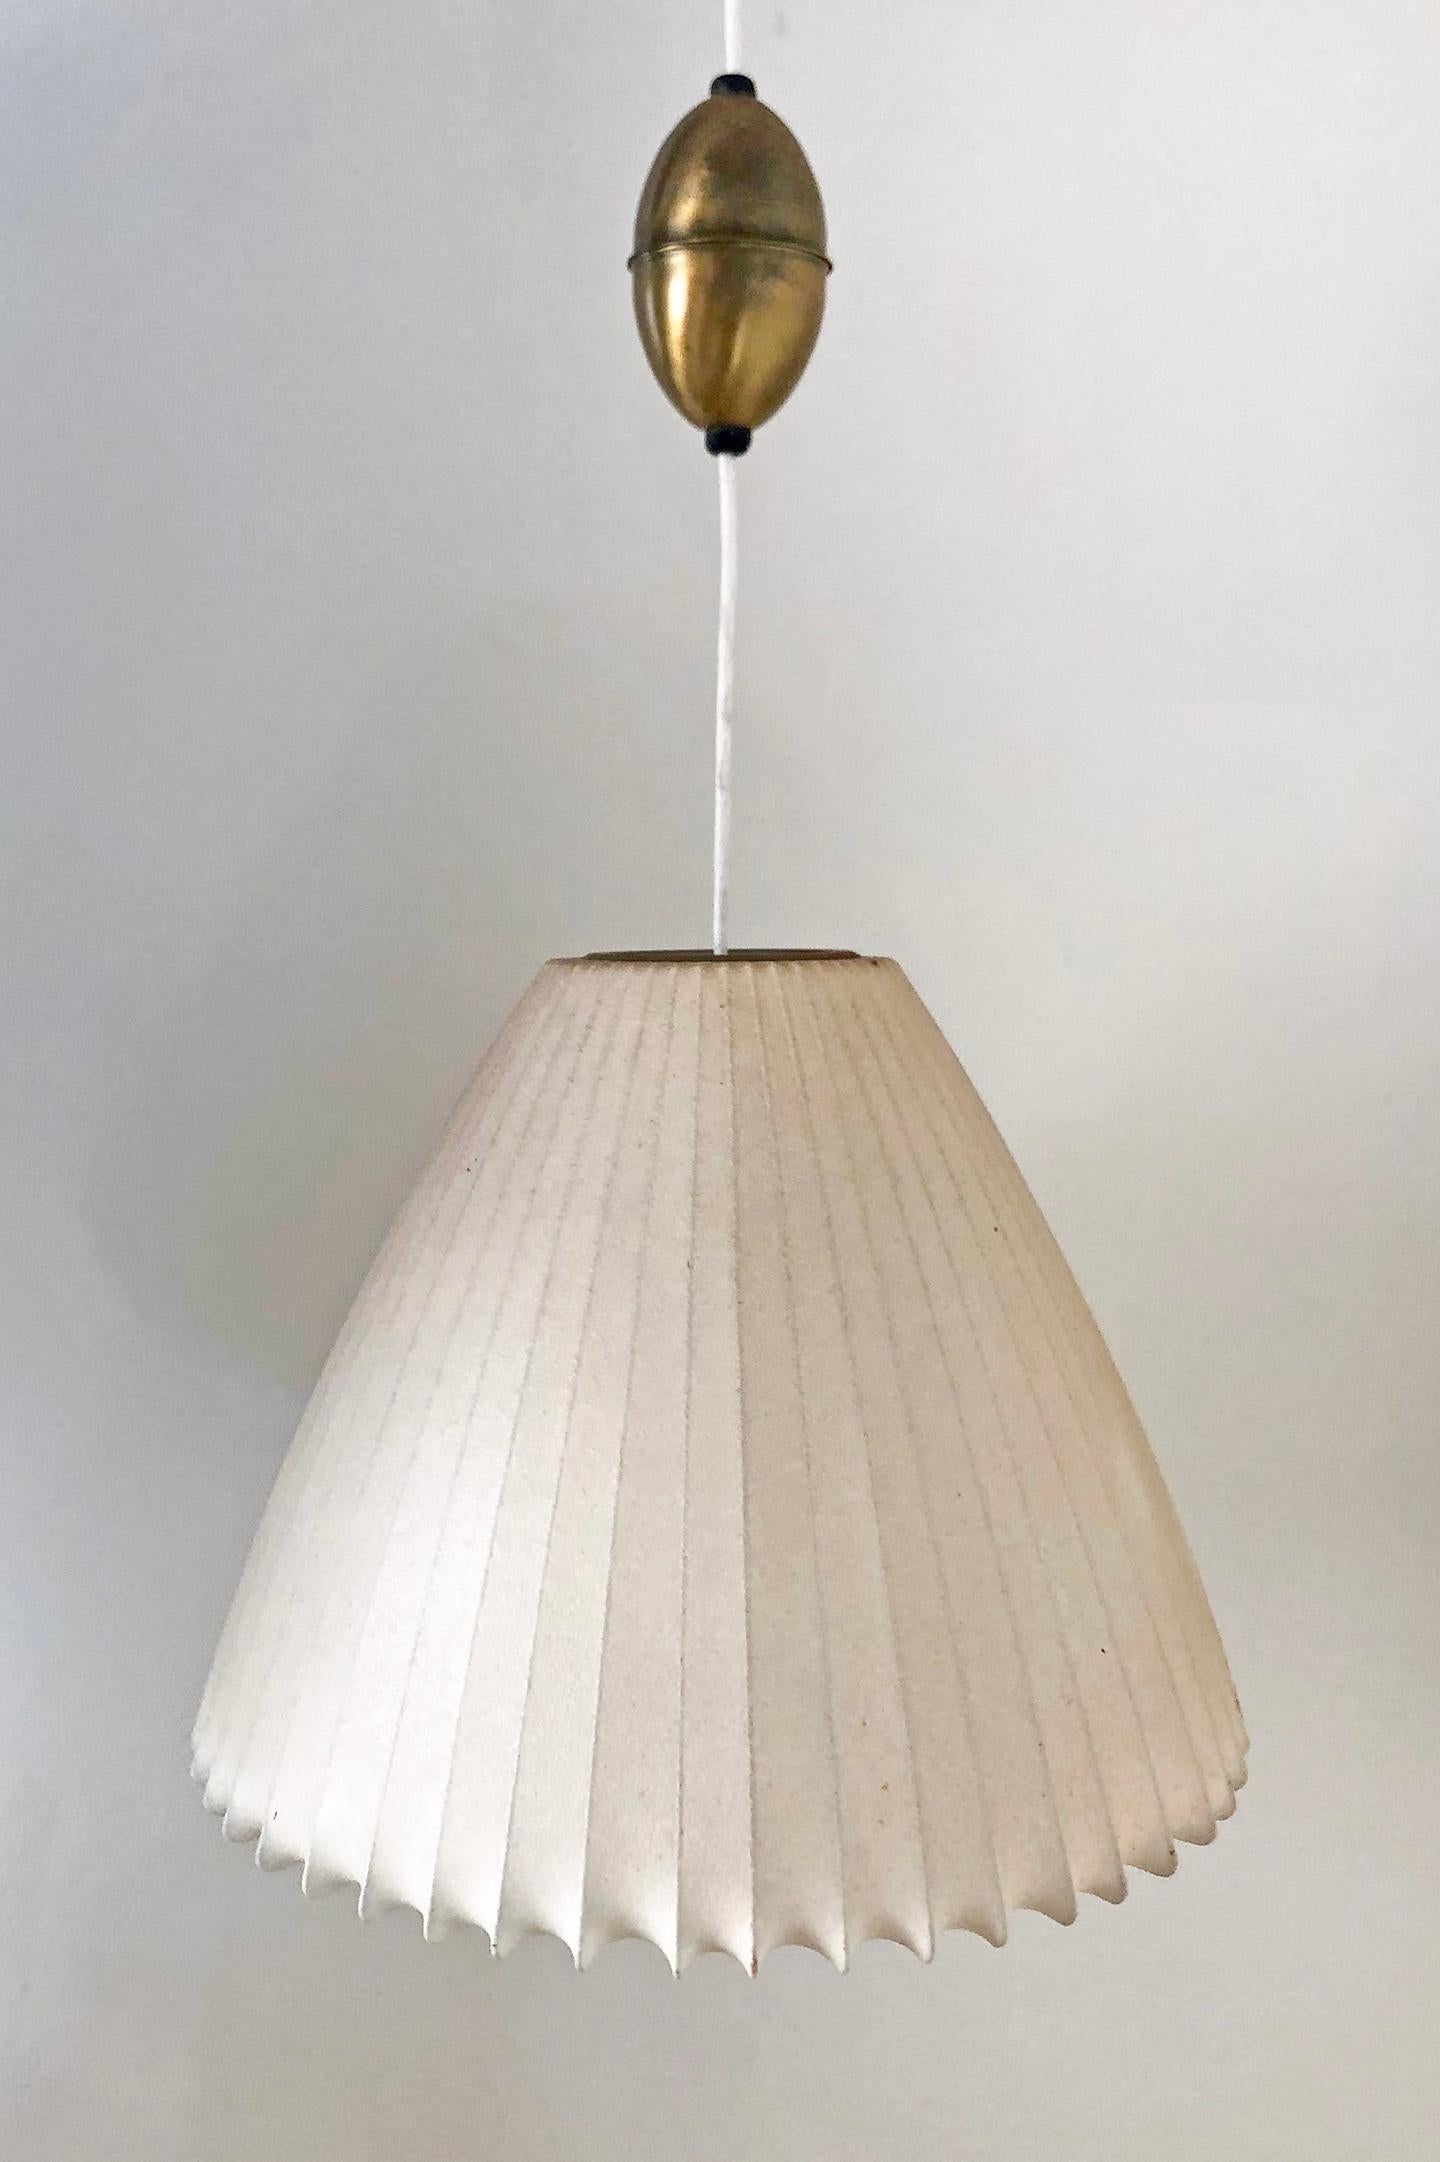 Designed in the 1950s this is one of the rarer George Nelson bubble lamp forms, the bell. This bell shaped pendant still retains its original Howard Miller labels, original patinated skin, and original brass components.

Pendant has original brass